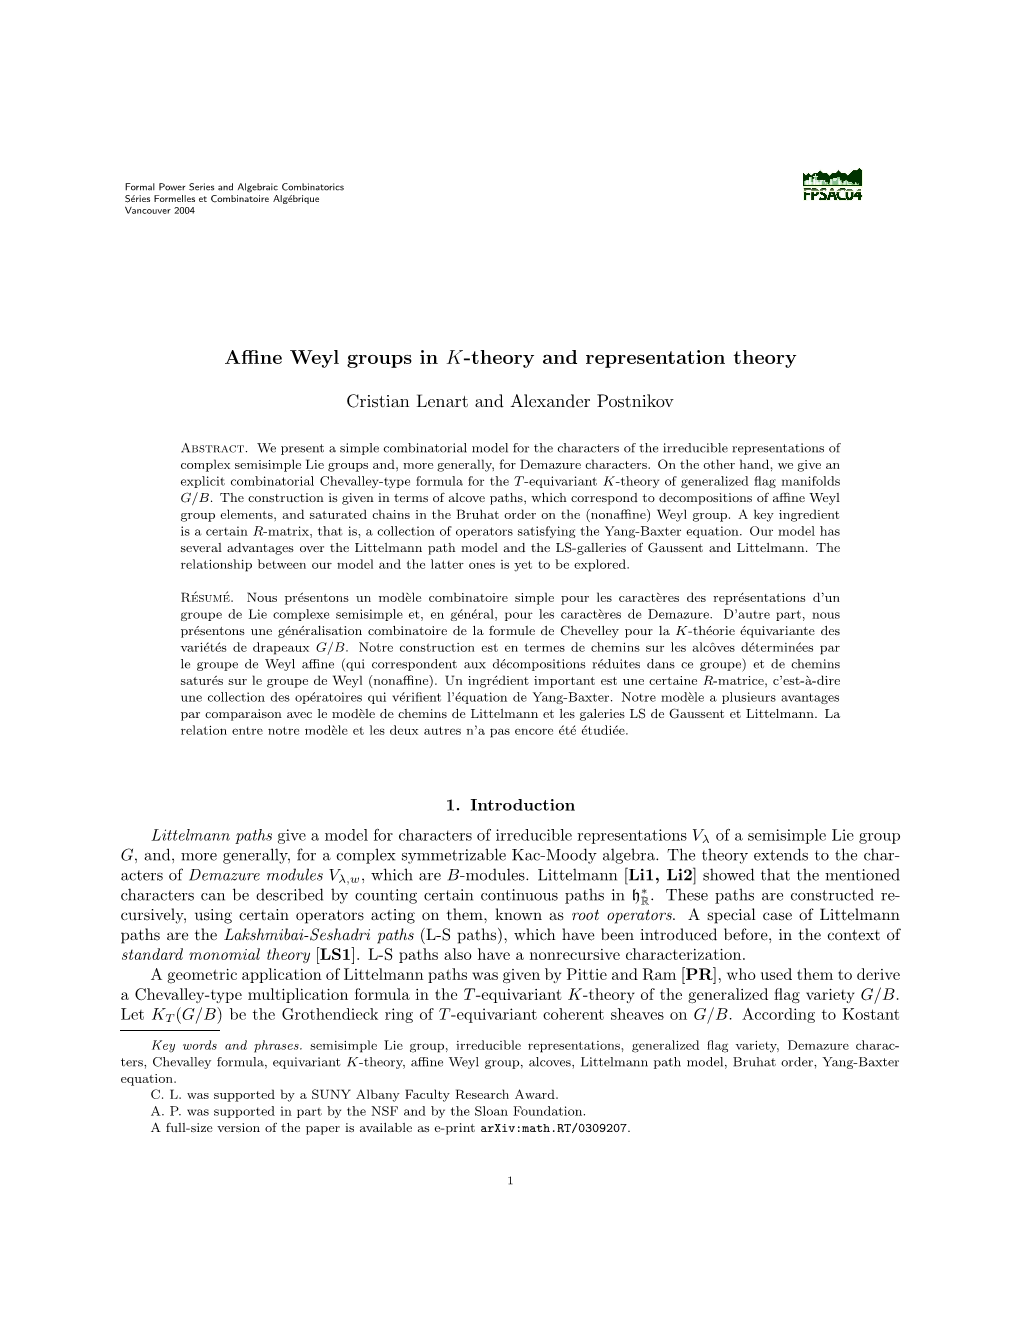 Affine Weyl Groups in K-Theory and Representation Theory 3